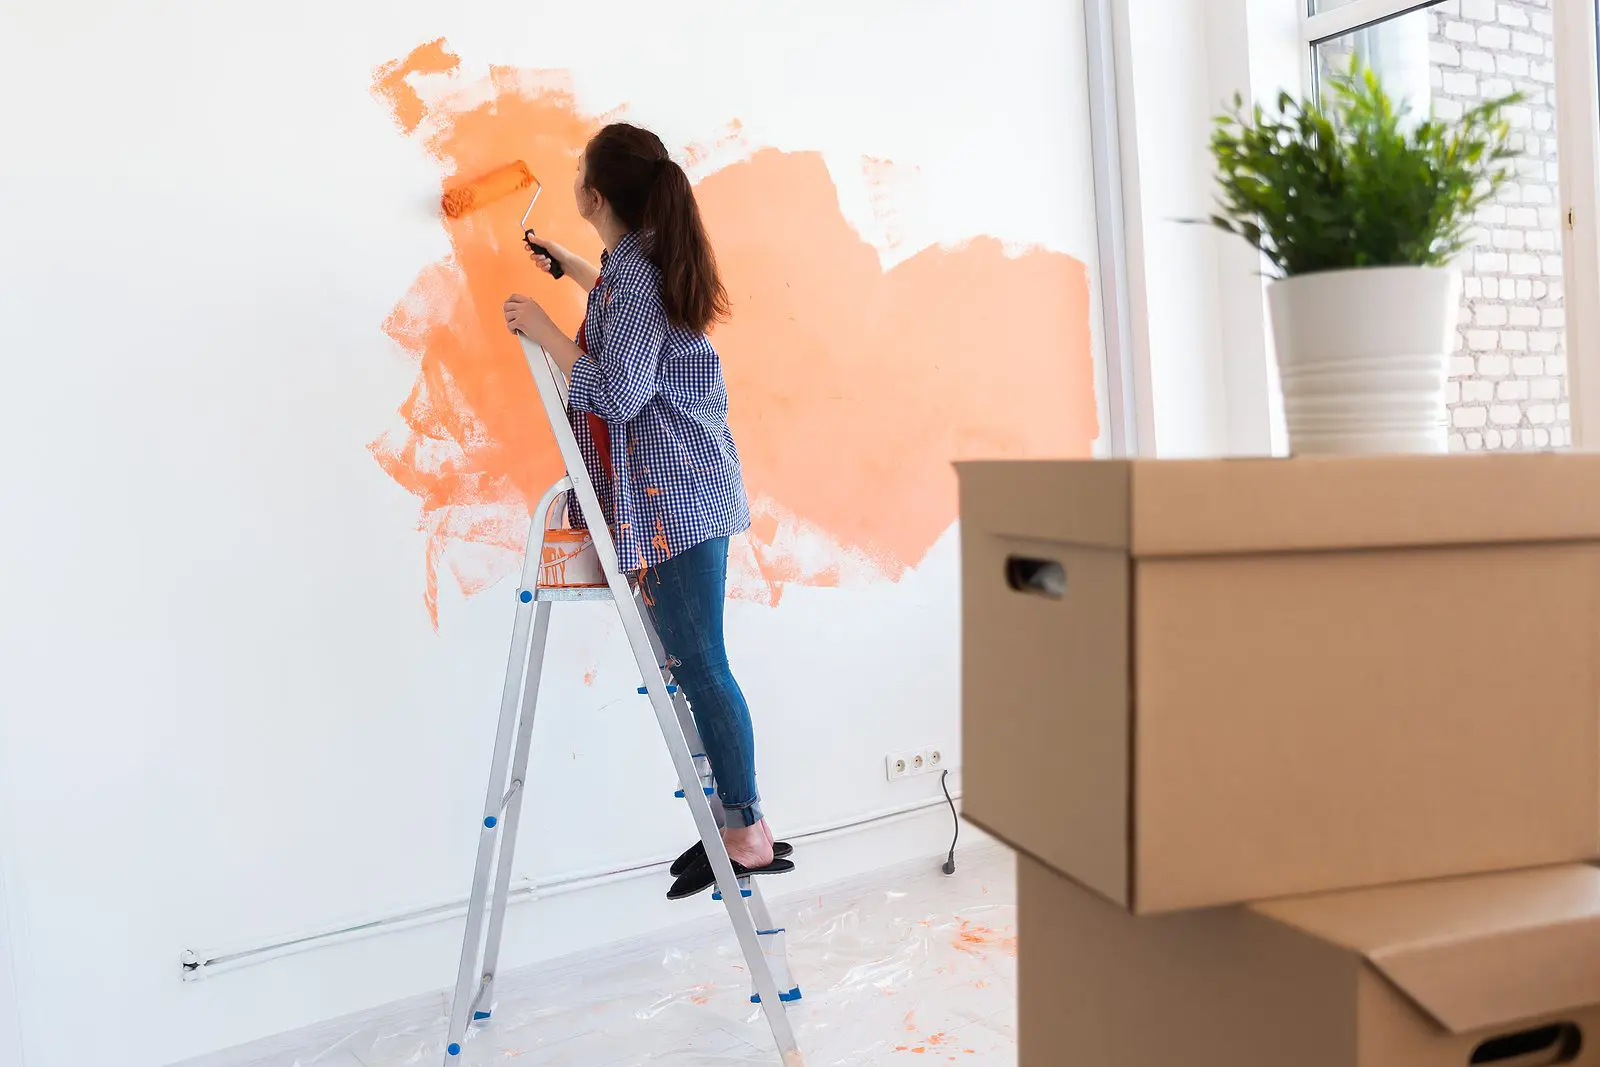 bigstock-happy-smiling-woman-painting-i-374944072